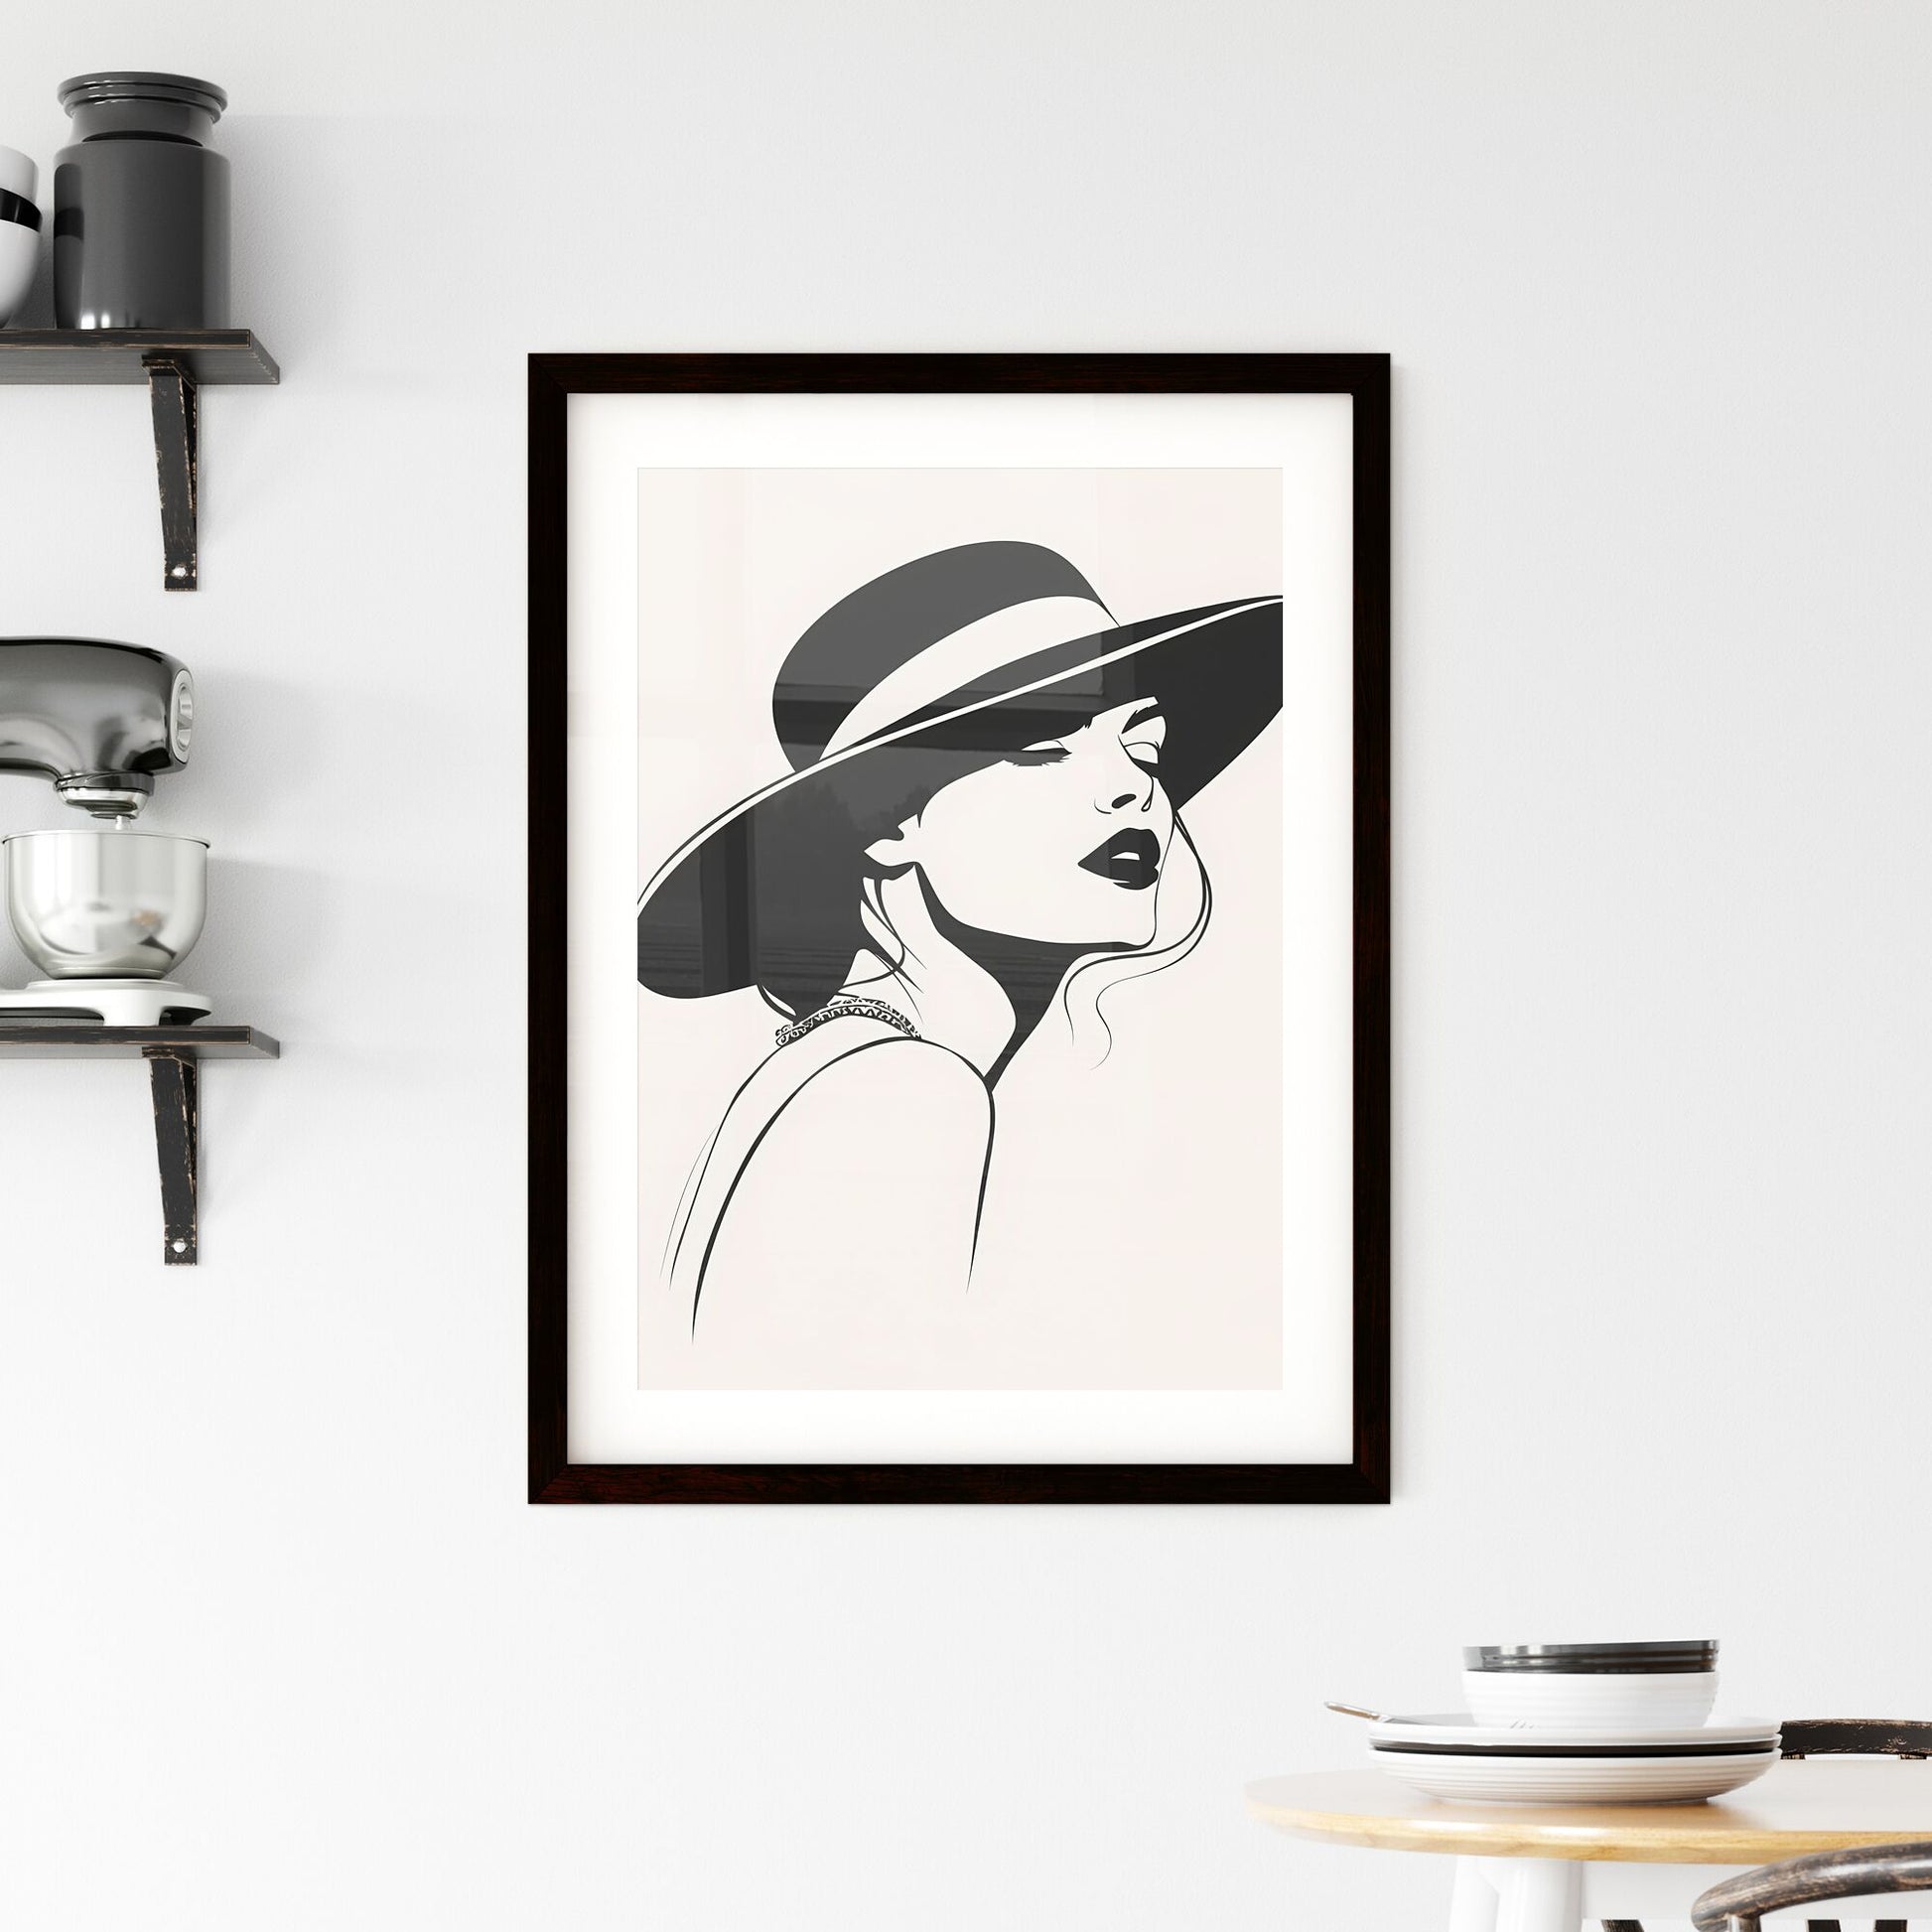 Minimalist Retro Fashion Illustration: Black and White Poster with Hat-Wearing Woman, Vibrant Painting, Art Focus Default Title